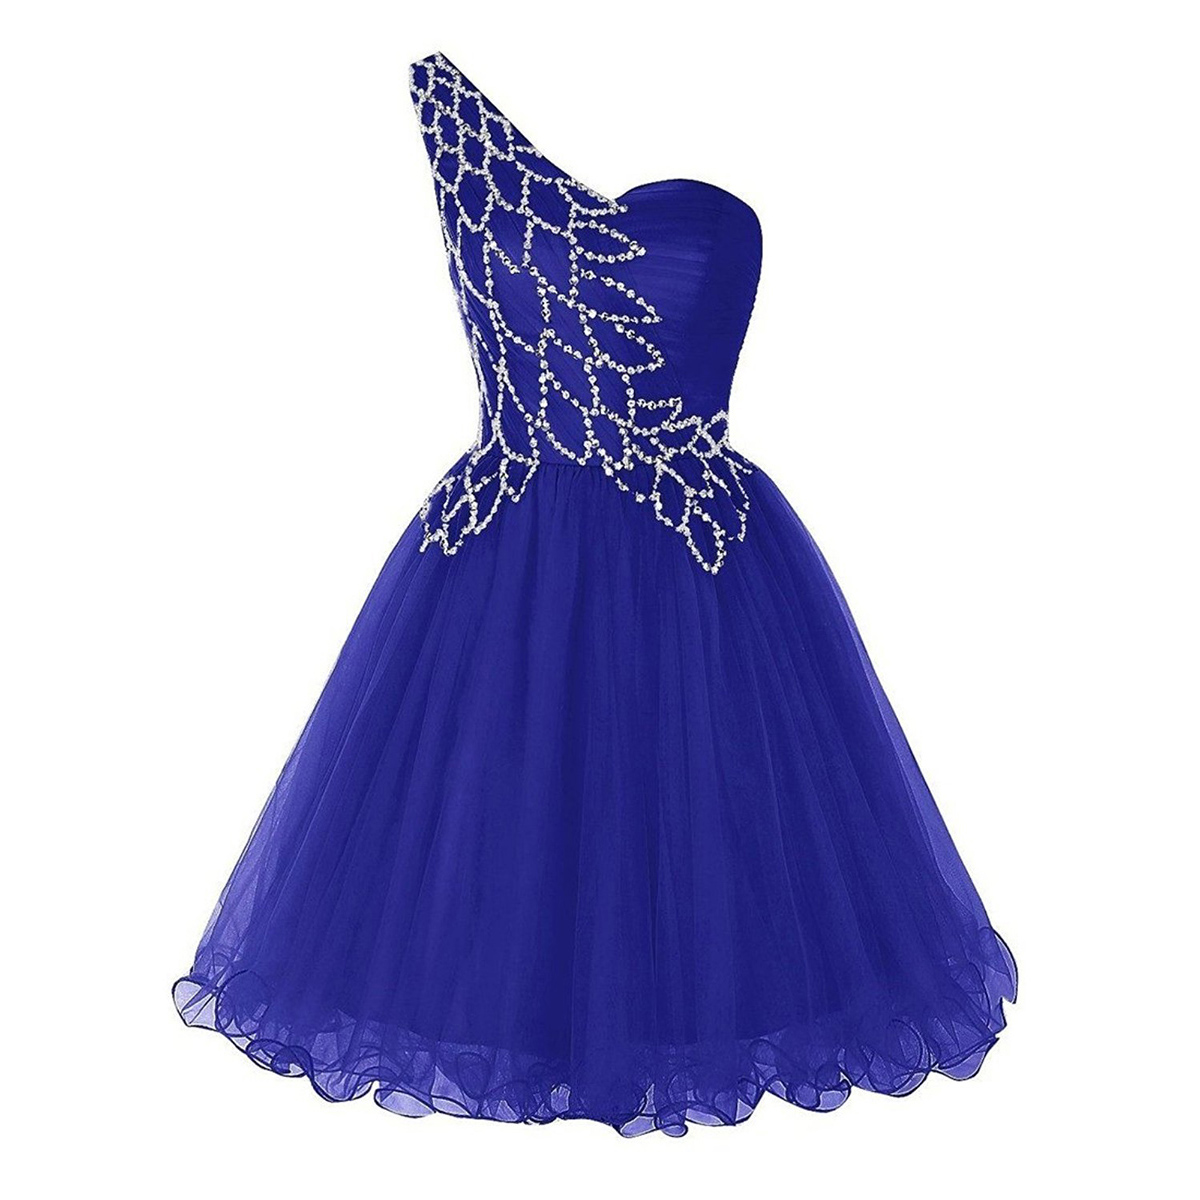 Unique Style One Shoulder A-line Prom Dress, Pretty Sequins Royal Blue Short Prom Dress, Sleeveless Mini Tulle Prom Dress